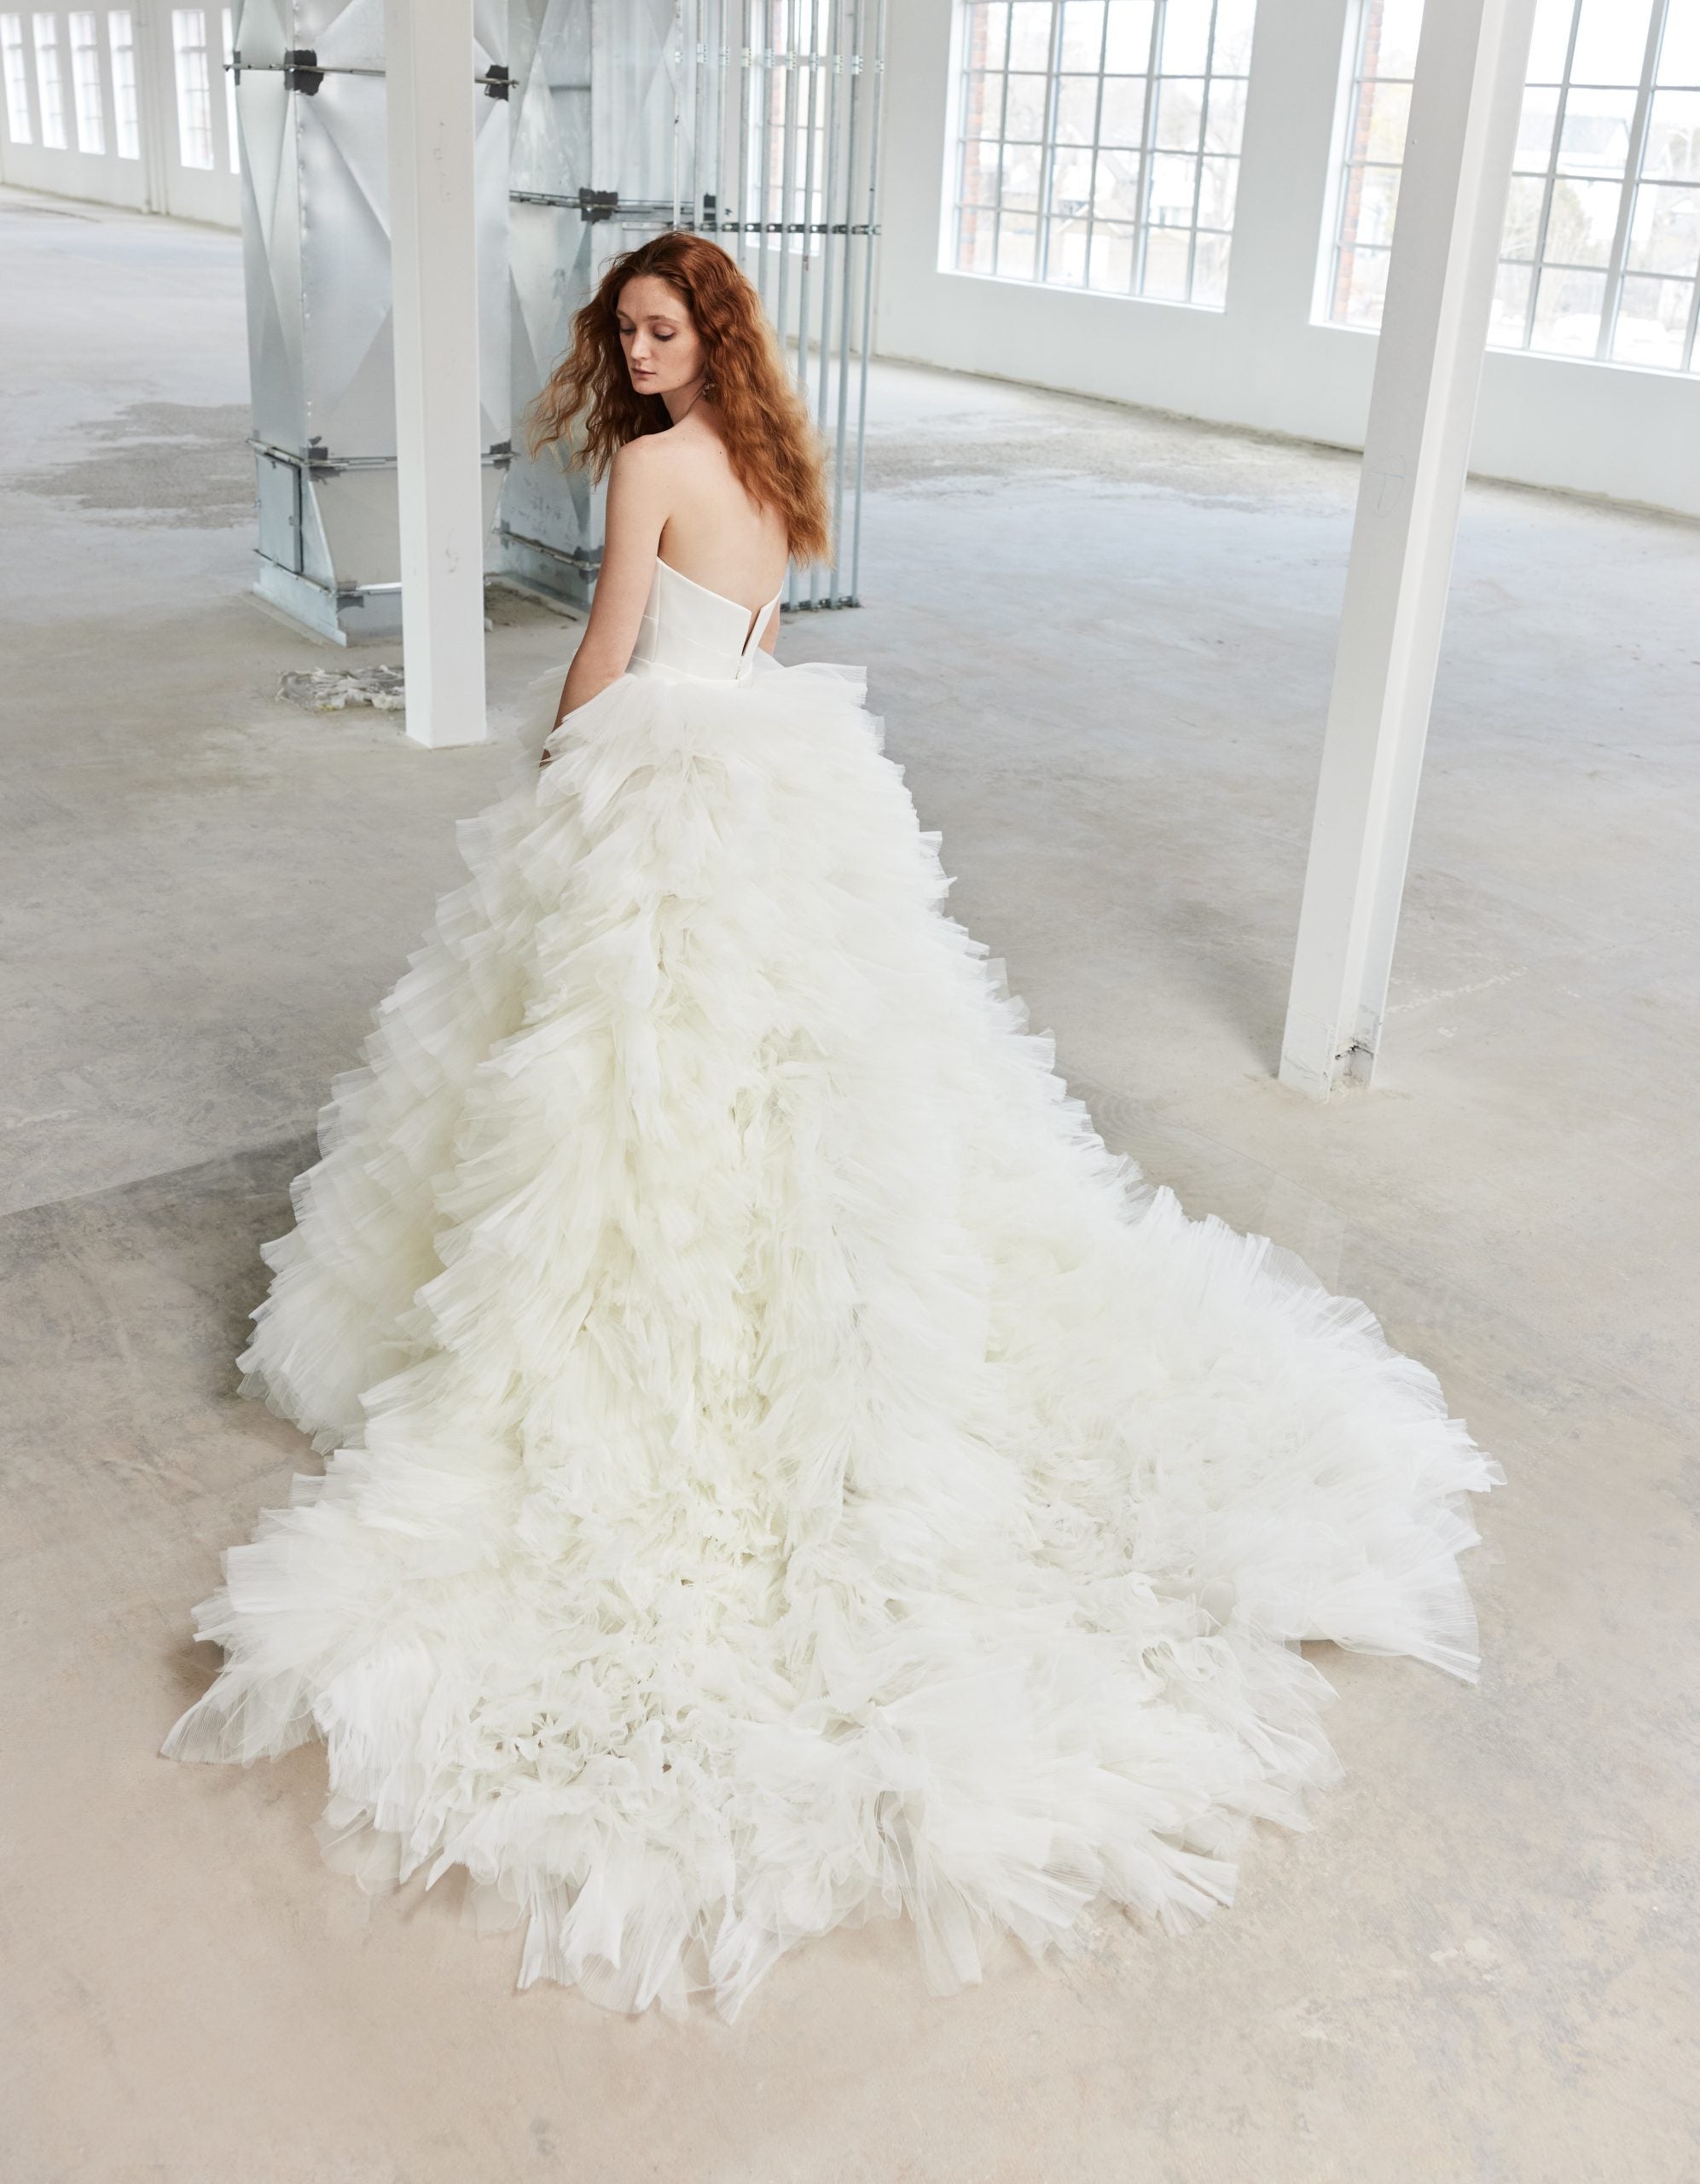 Voluminous Textured Modern Couture Ball Gown by Rivini - Image 1